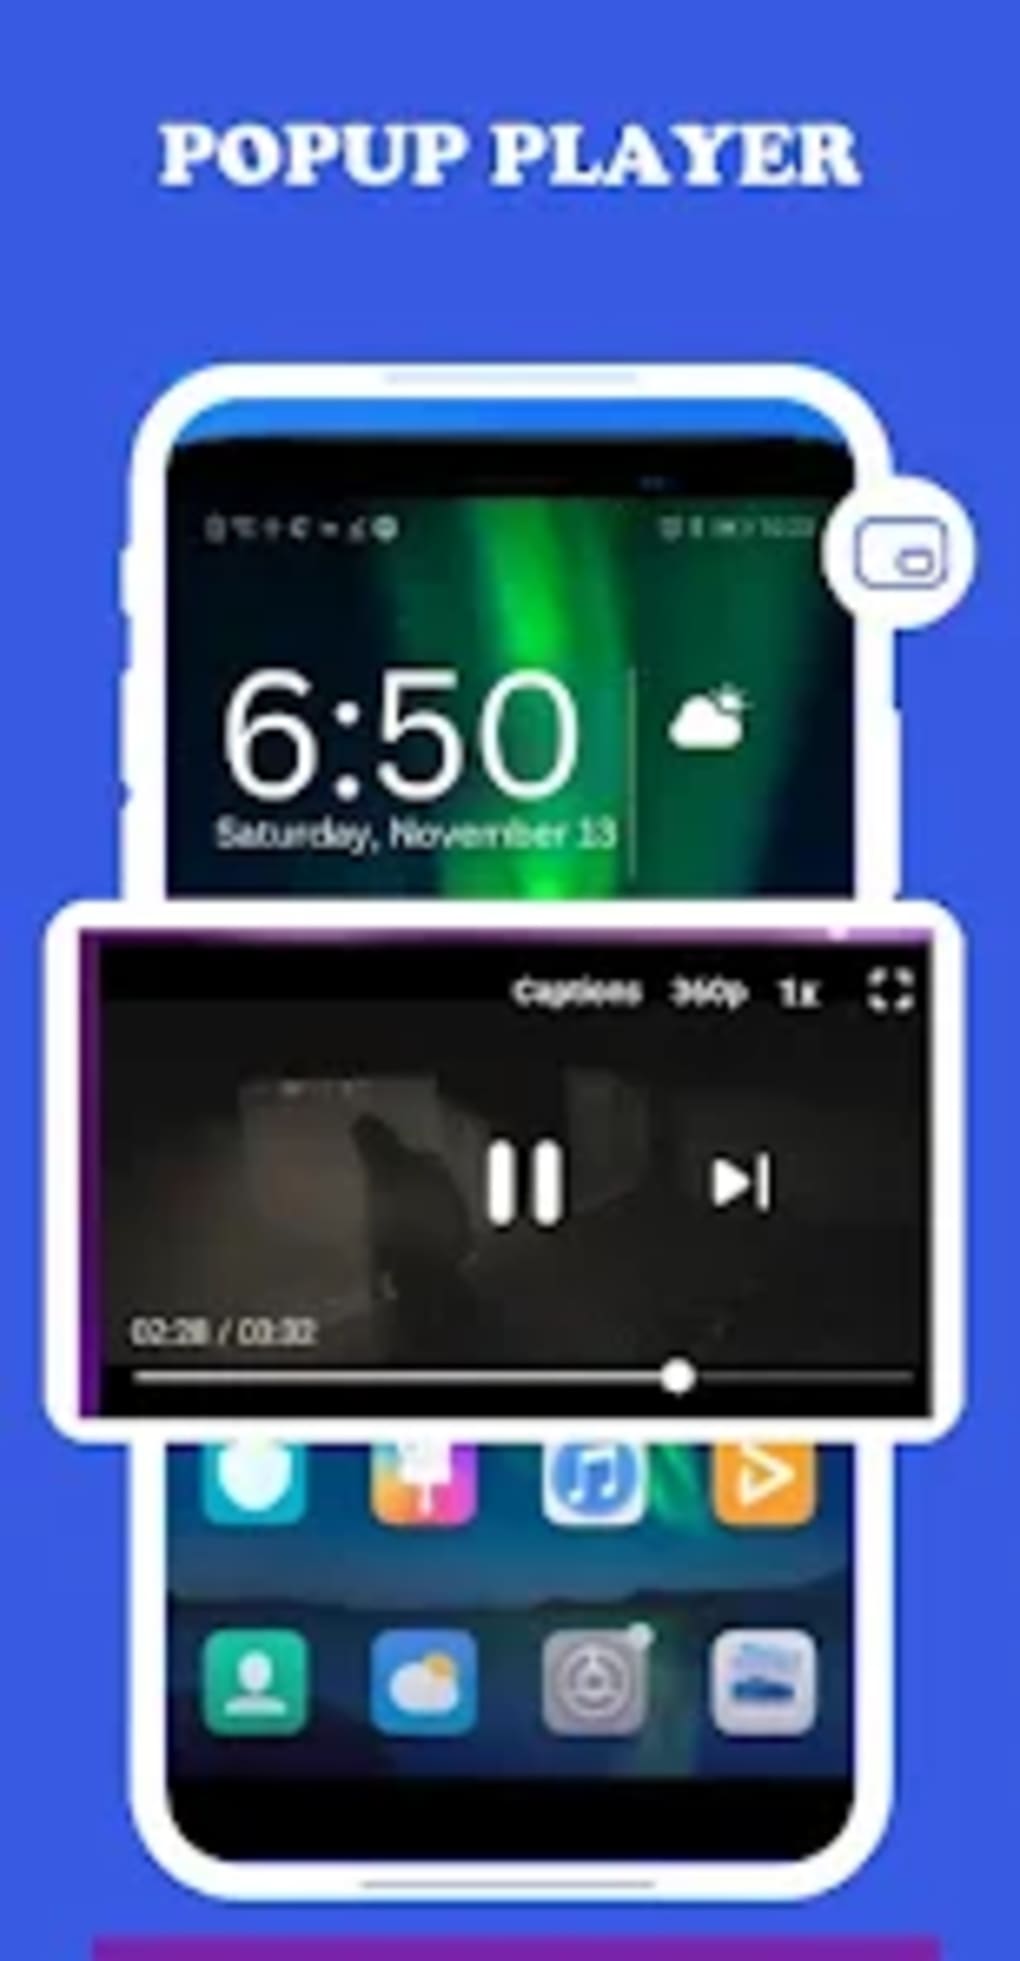 DailyTube - Block Ads Tube APK for Android - Download